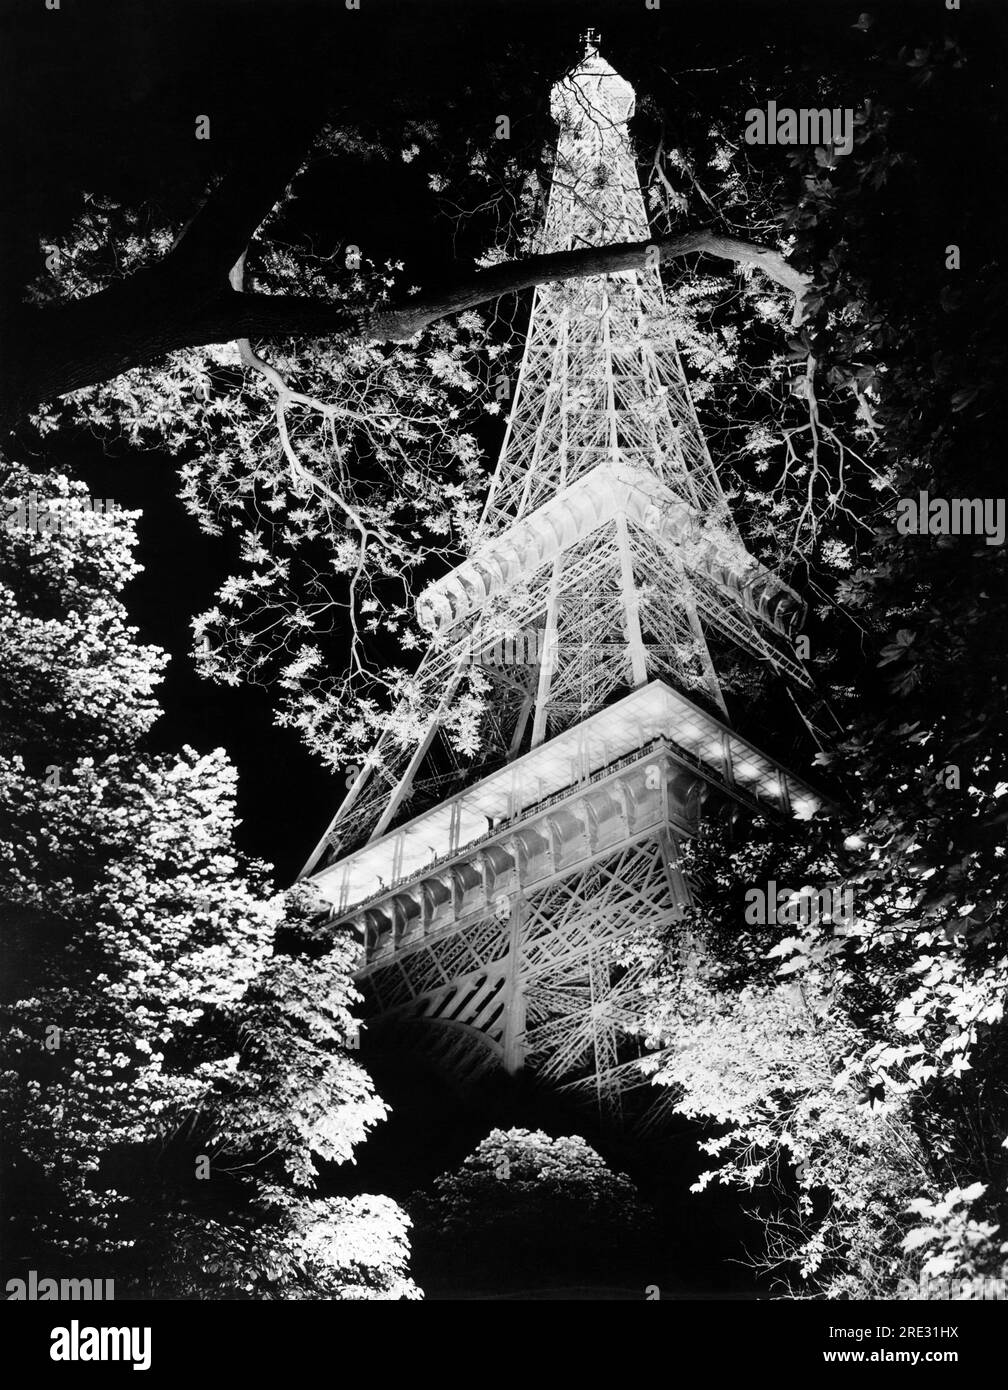 Paris, France:  c. 1962 The Eiffel Tower at night seen through the trees. Stock Photo